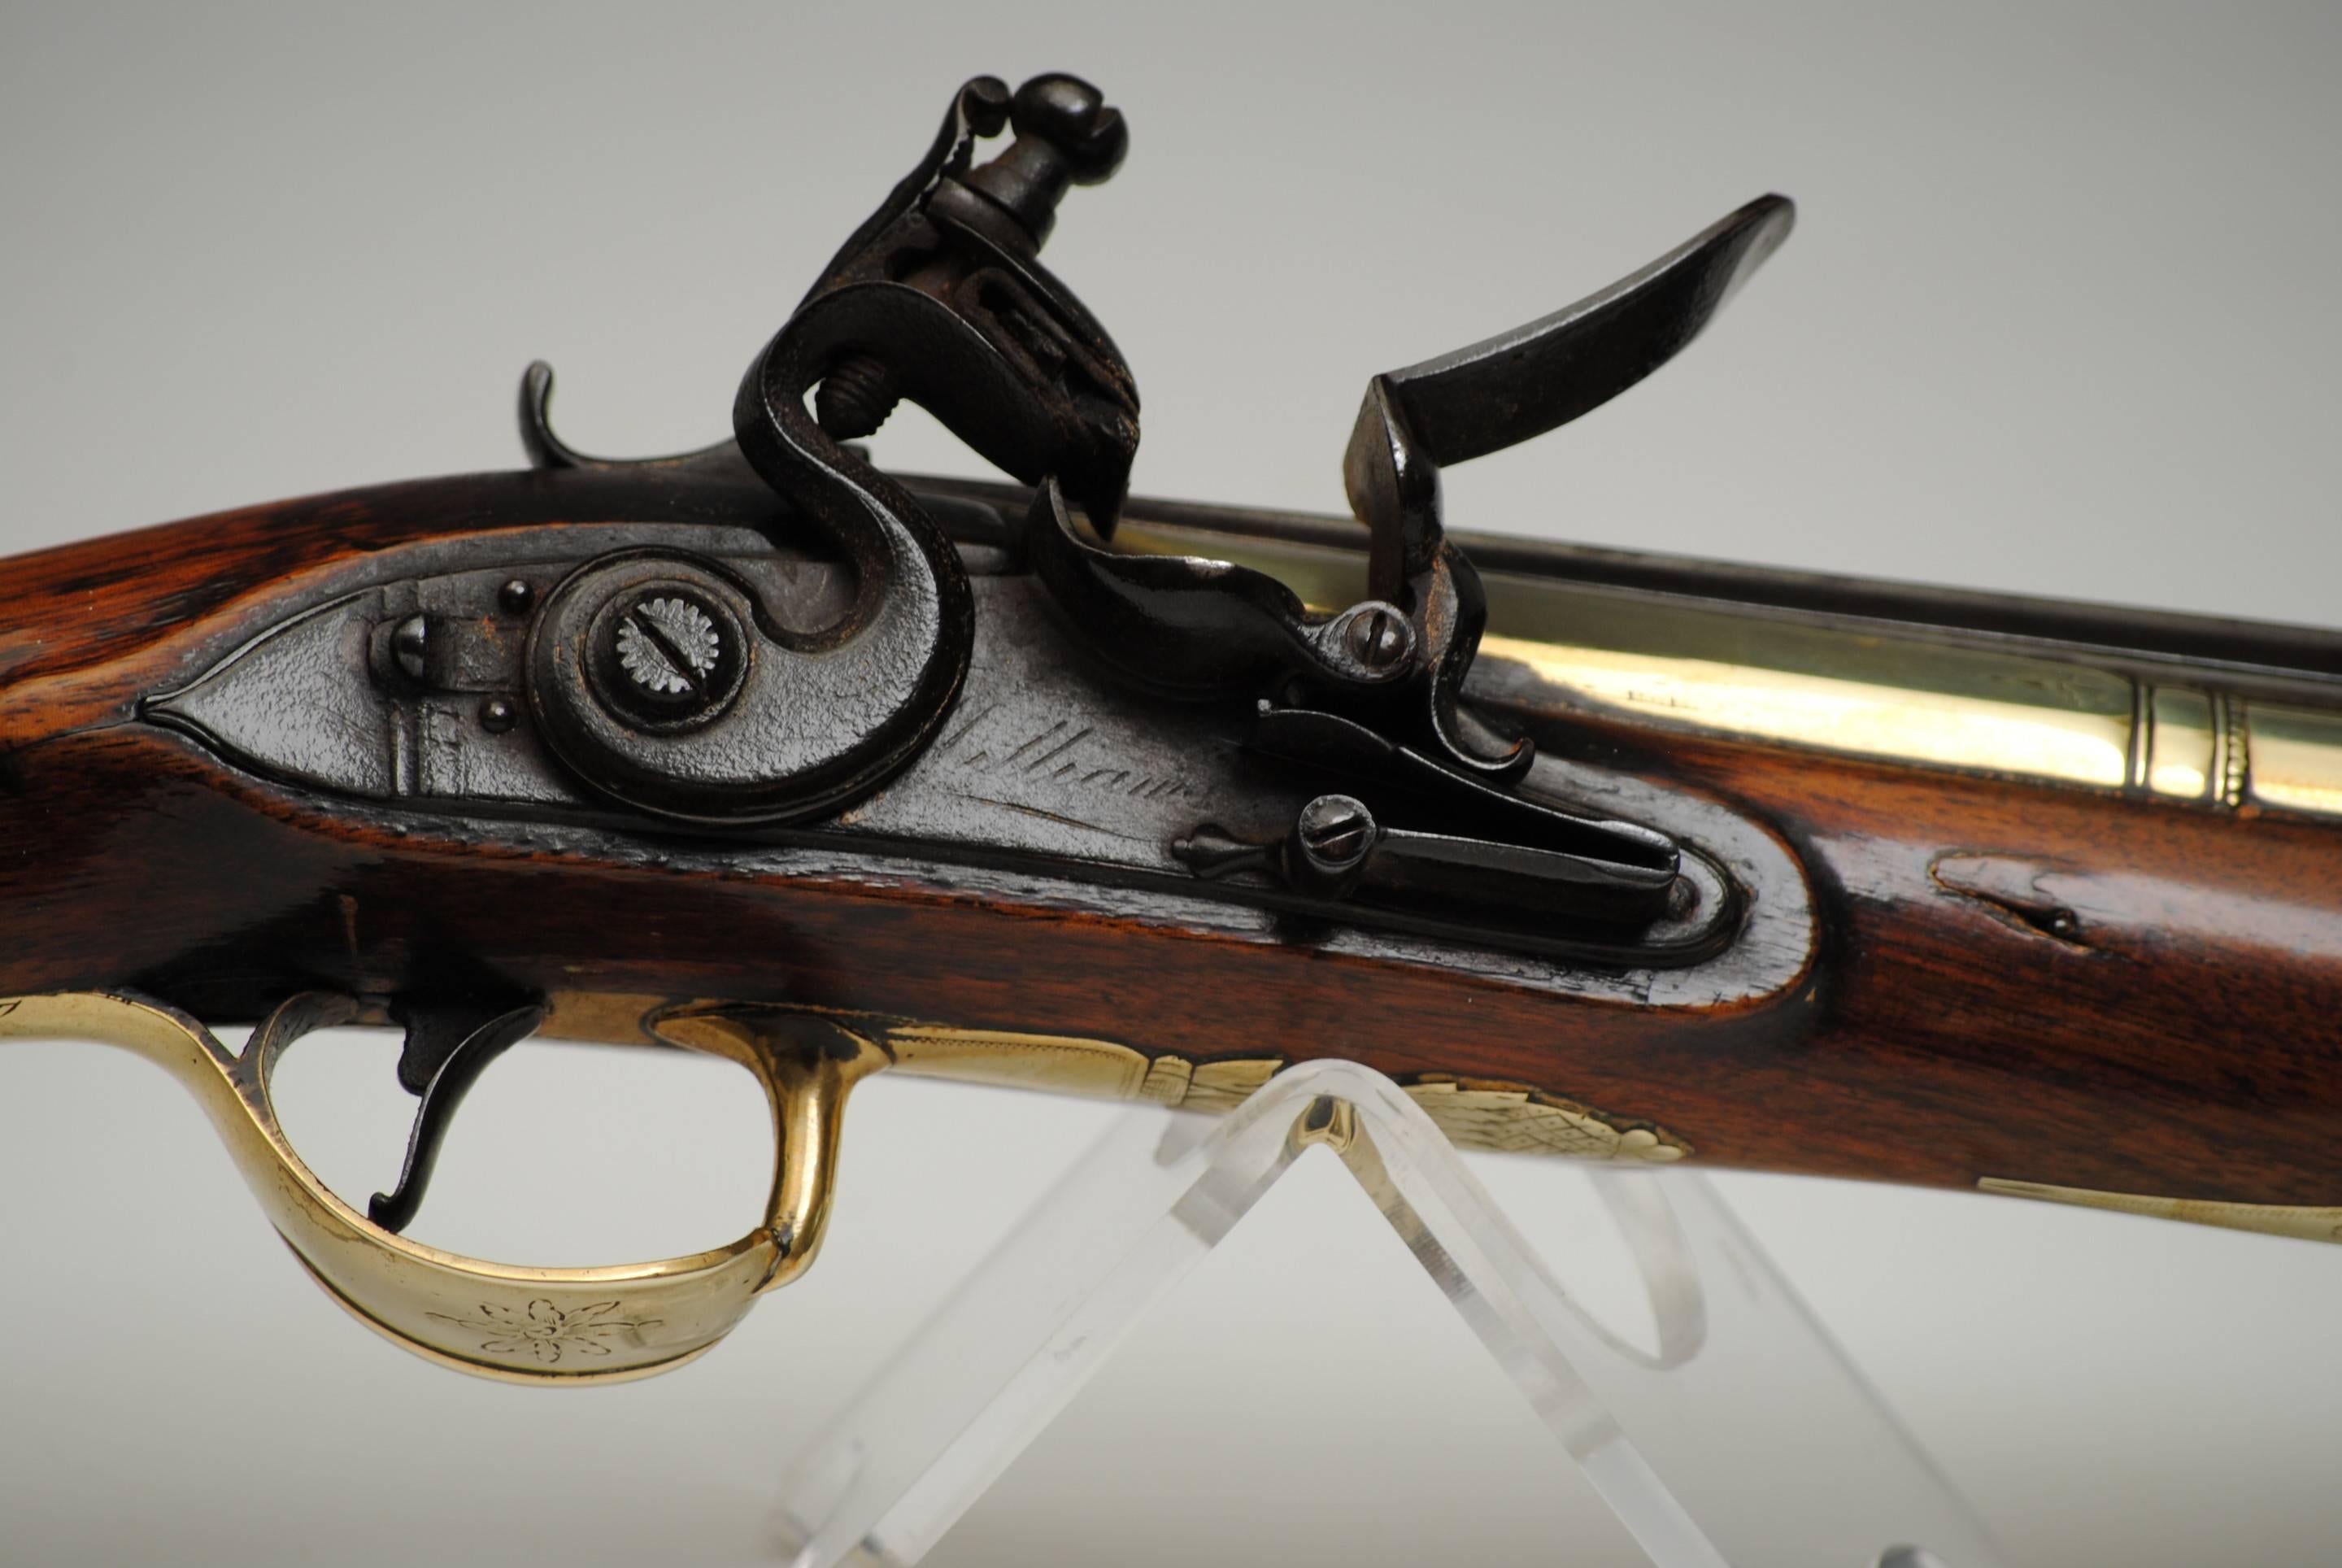 A good example of a three stage brass barreled flintlock blunderbuss by Wilson, in original condition with superb walnut stock.